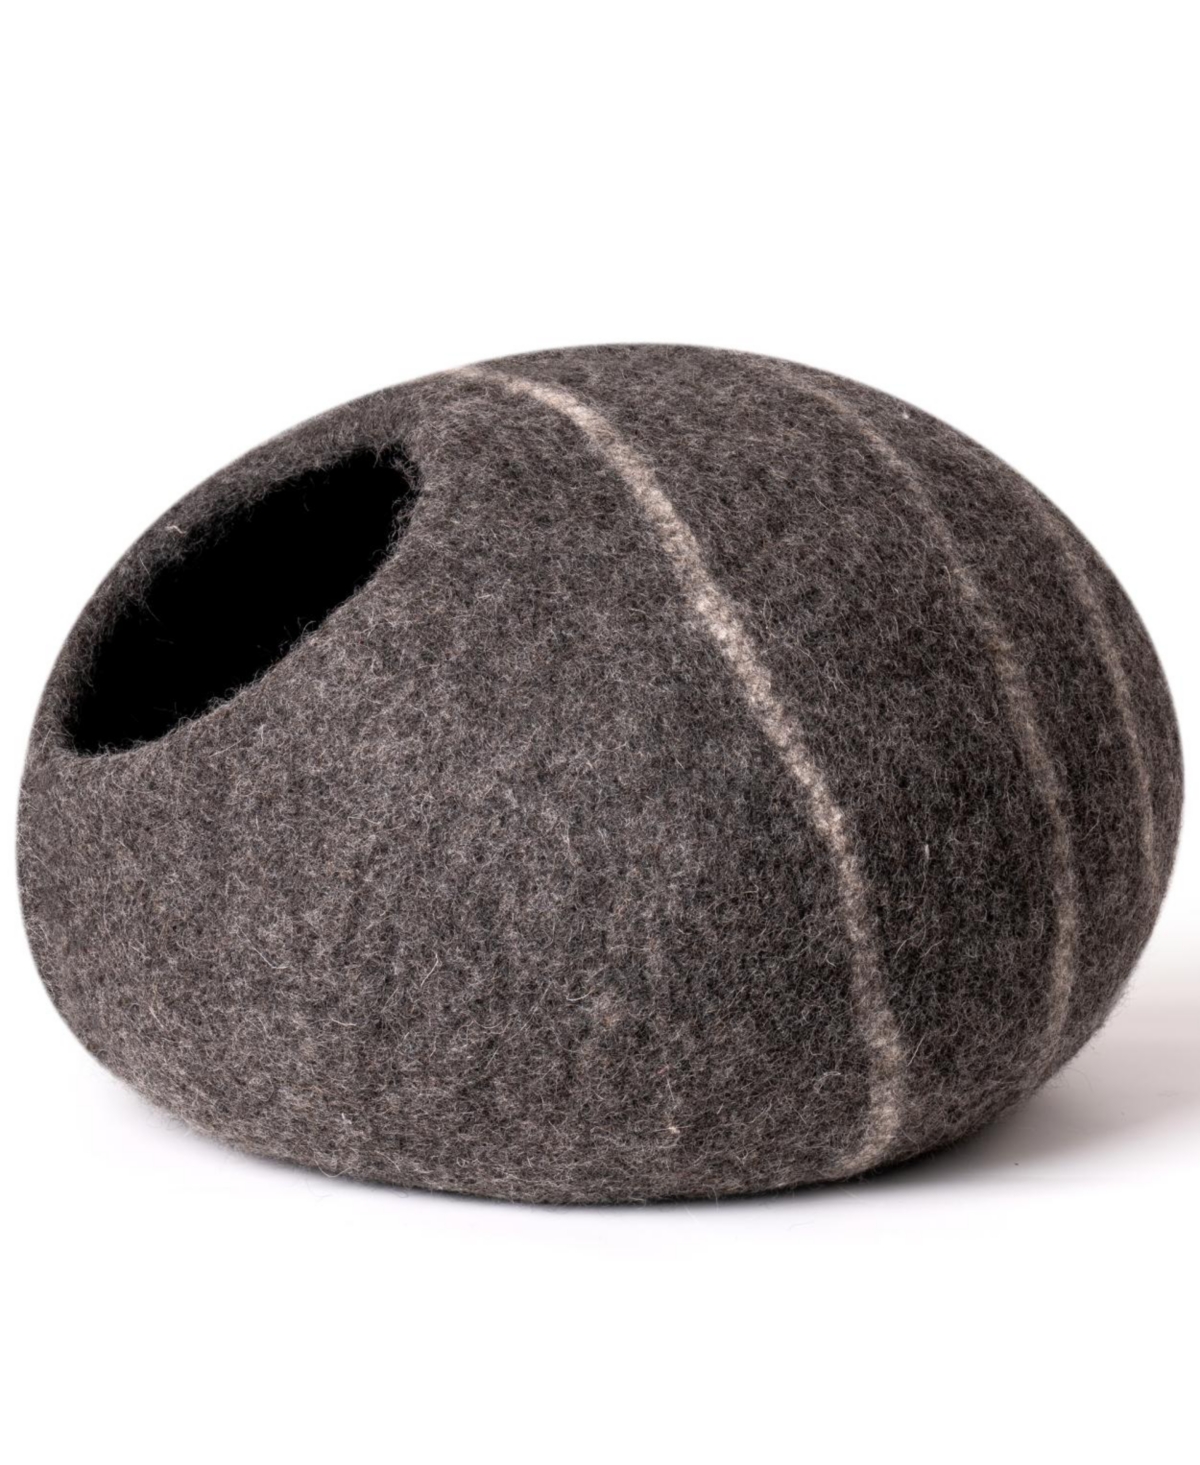 Cat Cave Bed - Handmade Wool Cat Bed Cave With Mouse Toy - Black